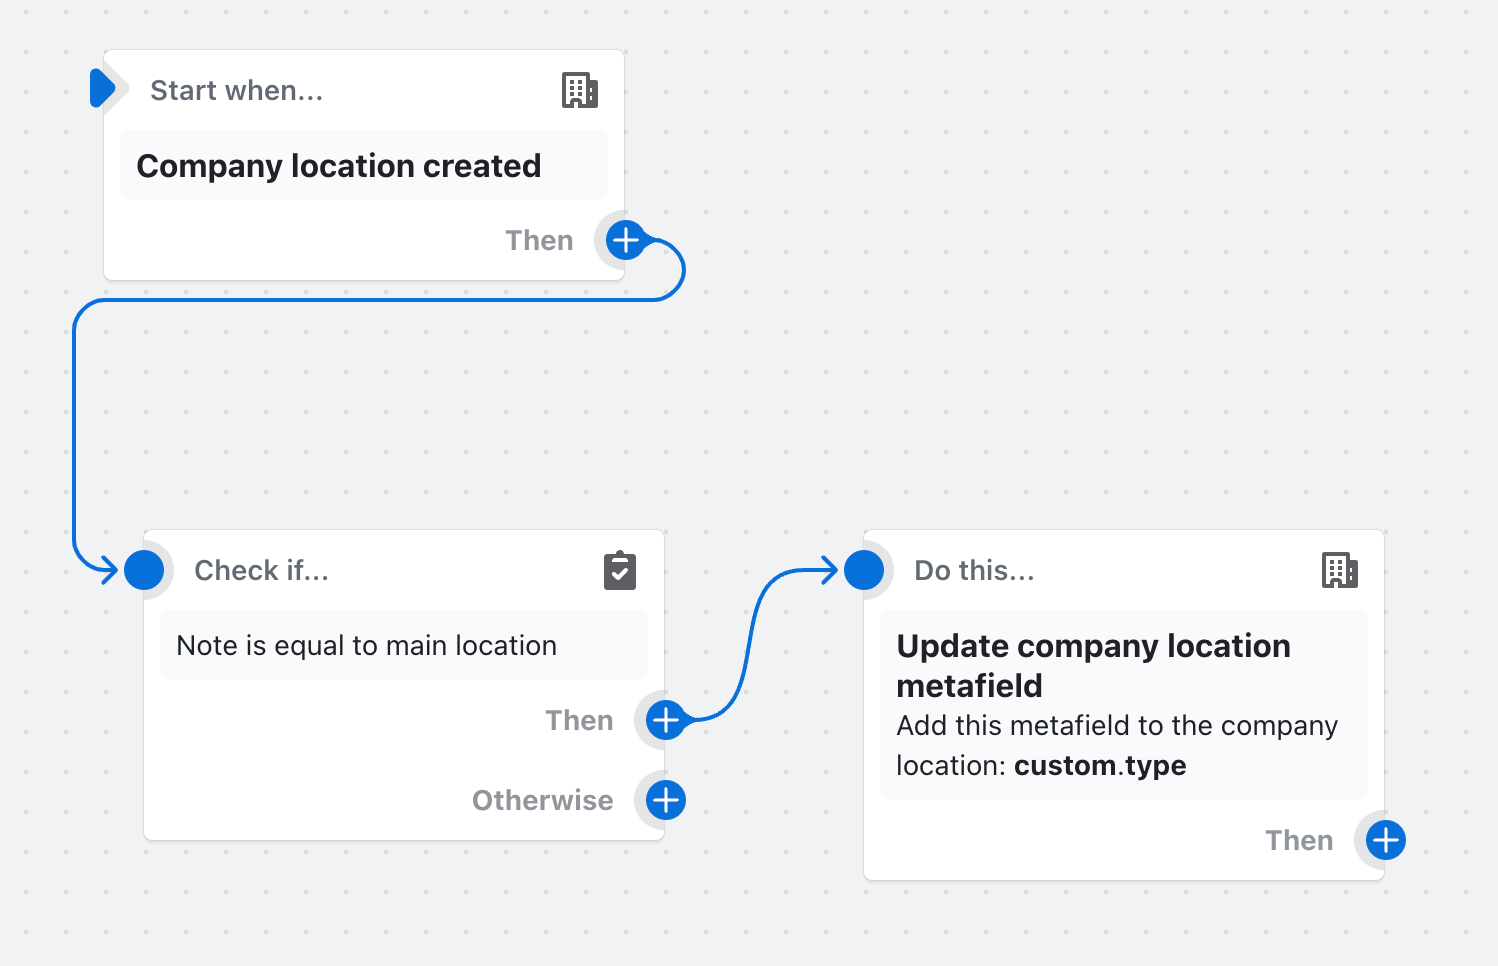 Example of a workflow that adds a company location metafield when a company location is created